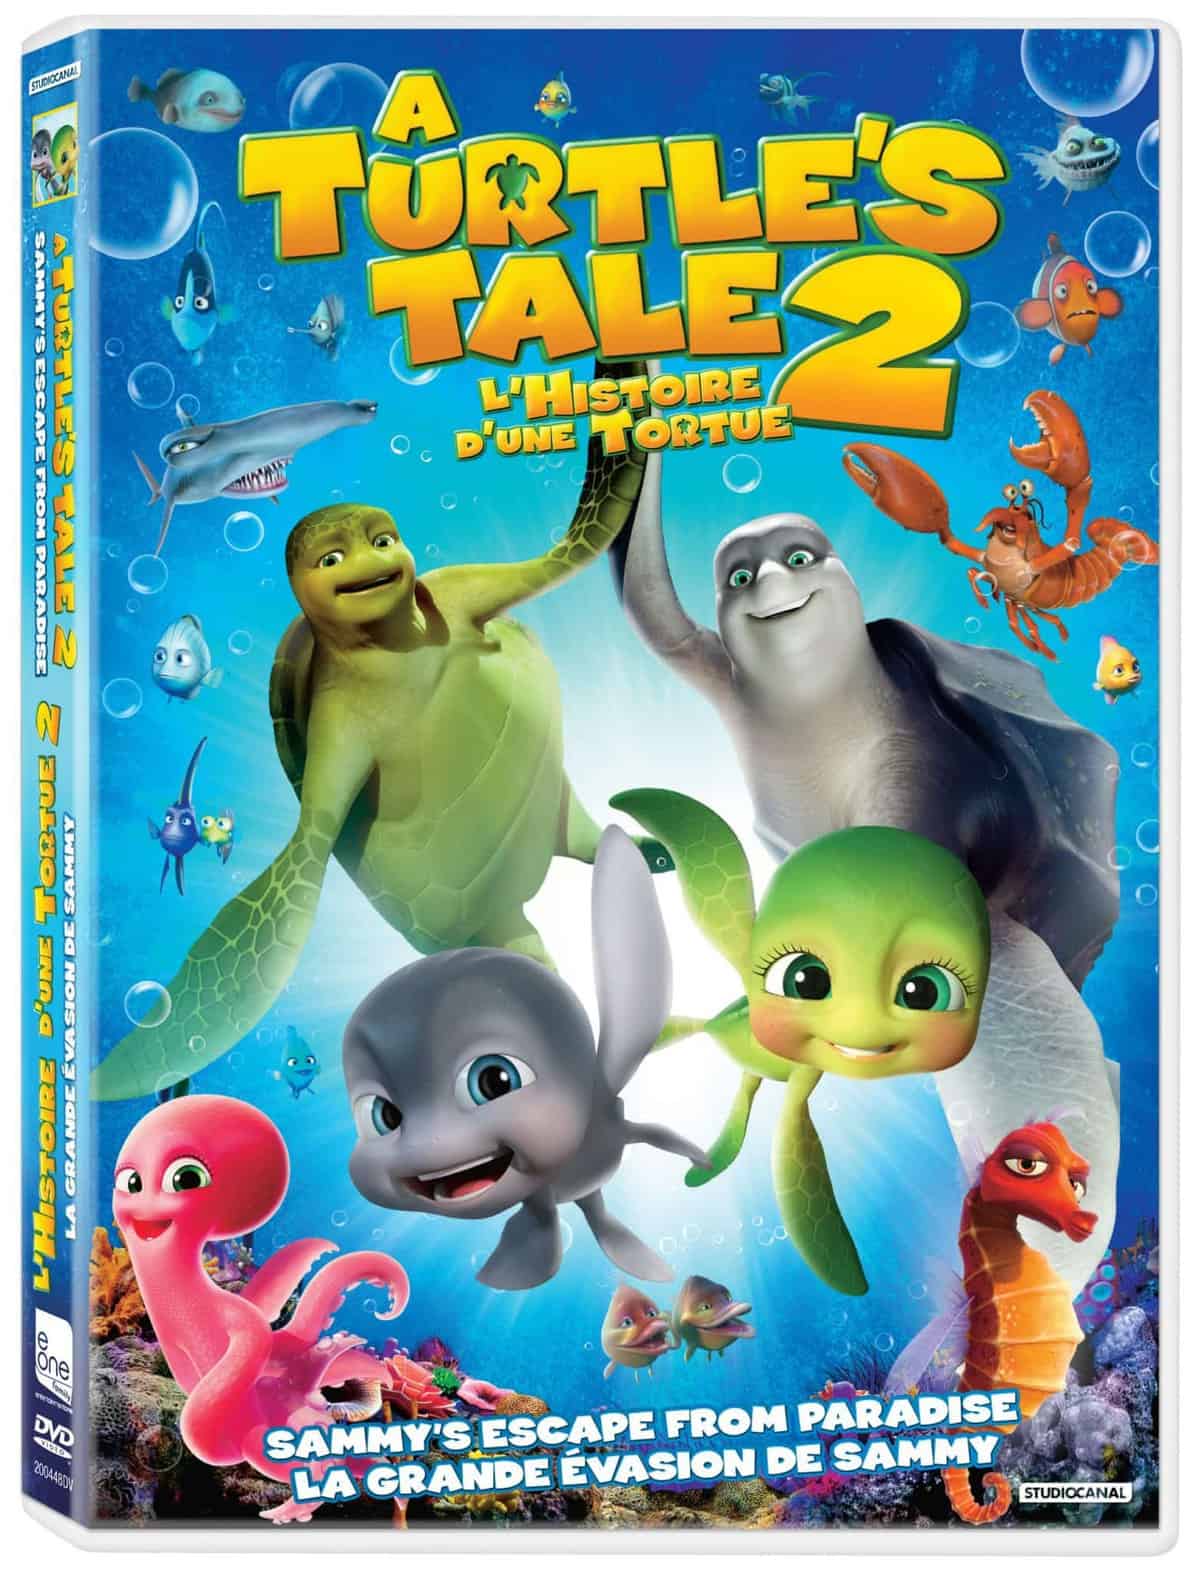 A Turtles Tale 2: Sammys Escape From Paradise - Trailer